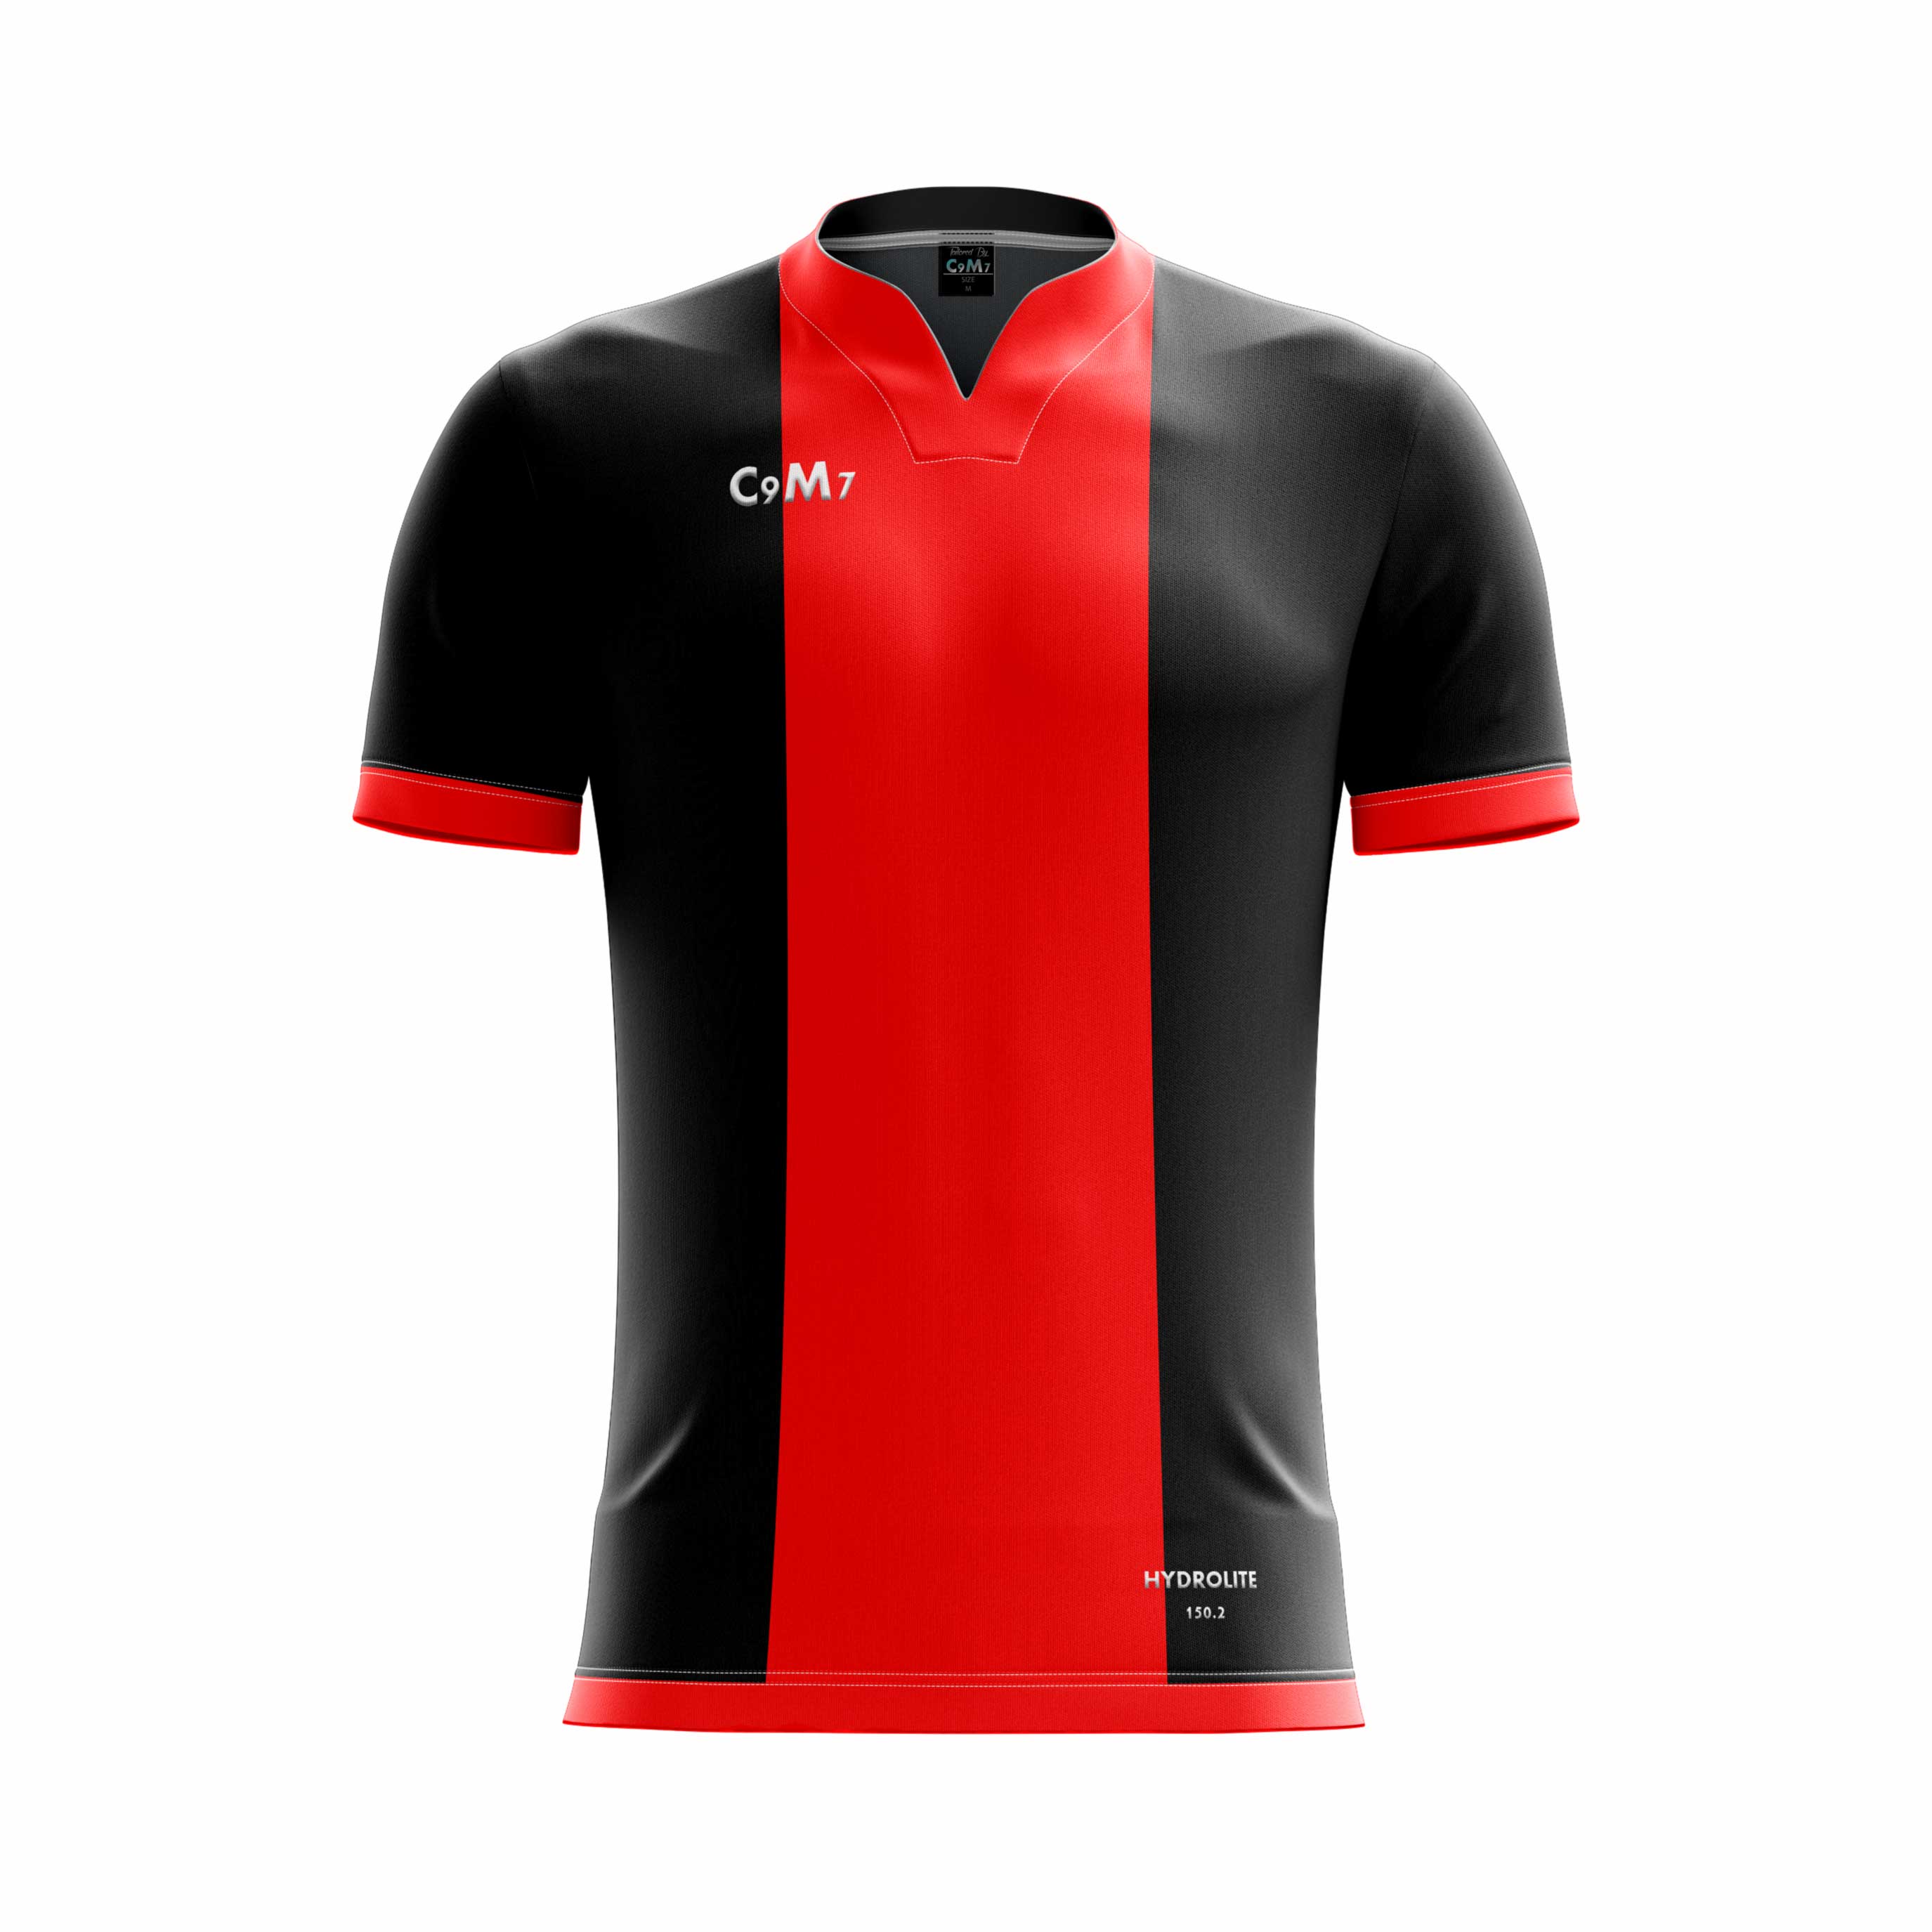 red and black soccer jersey